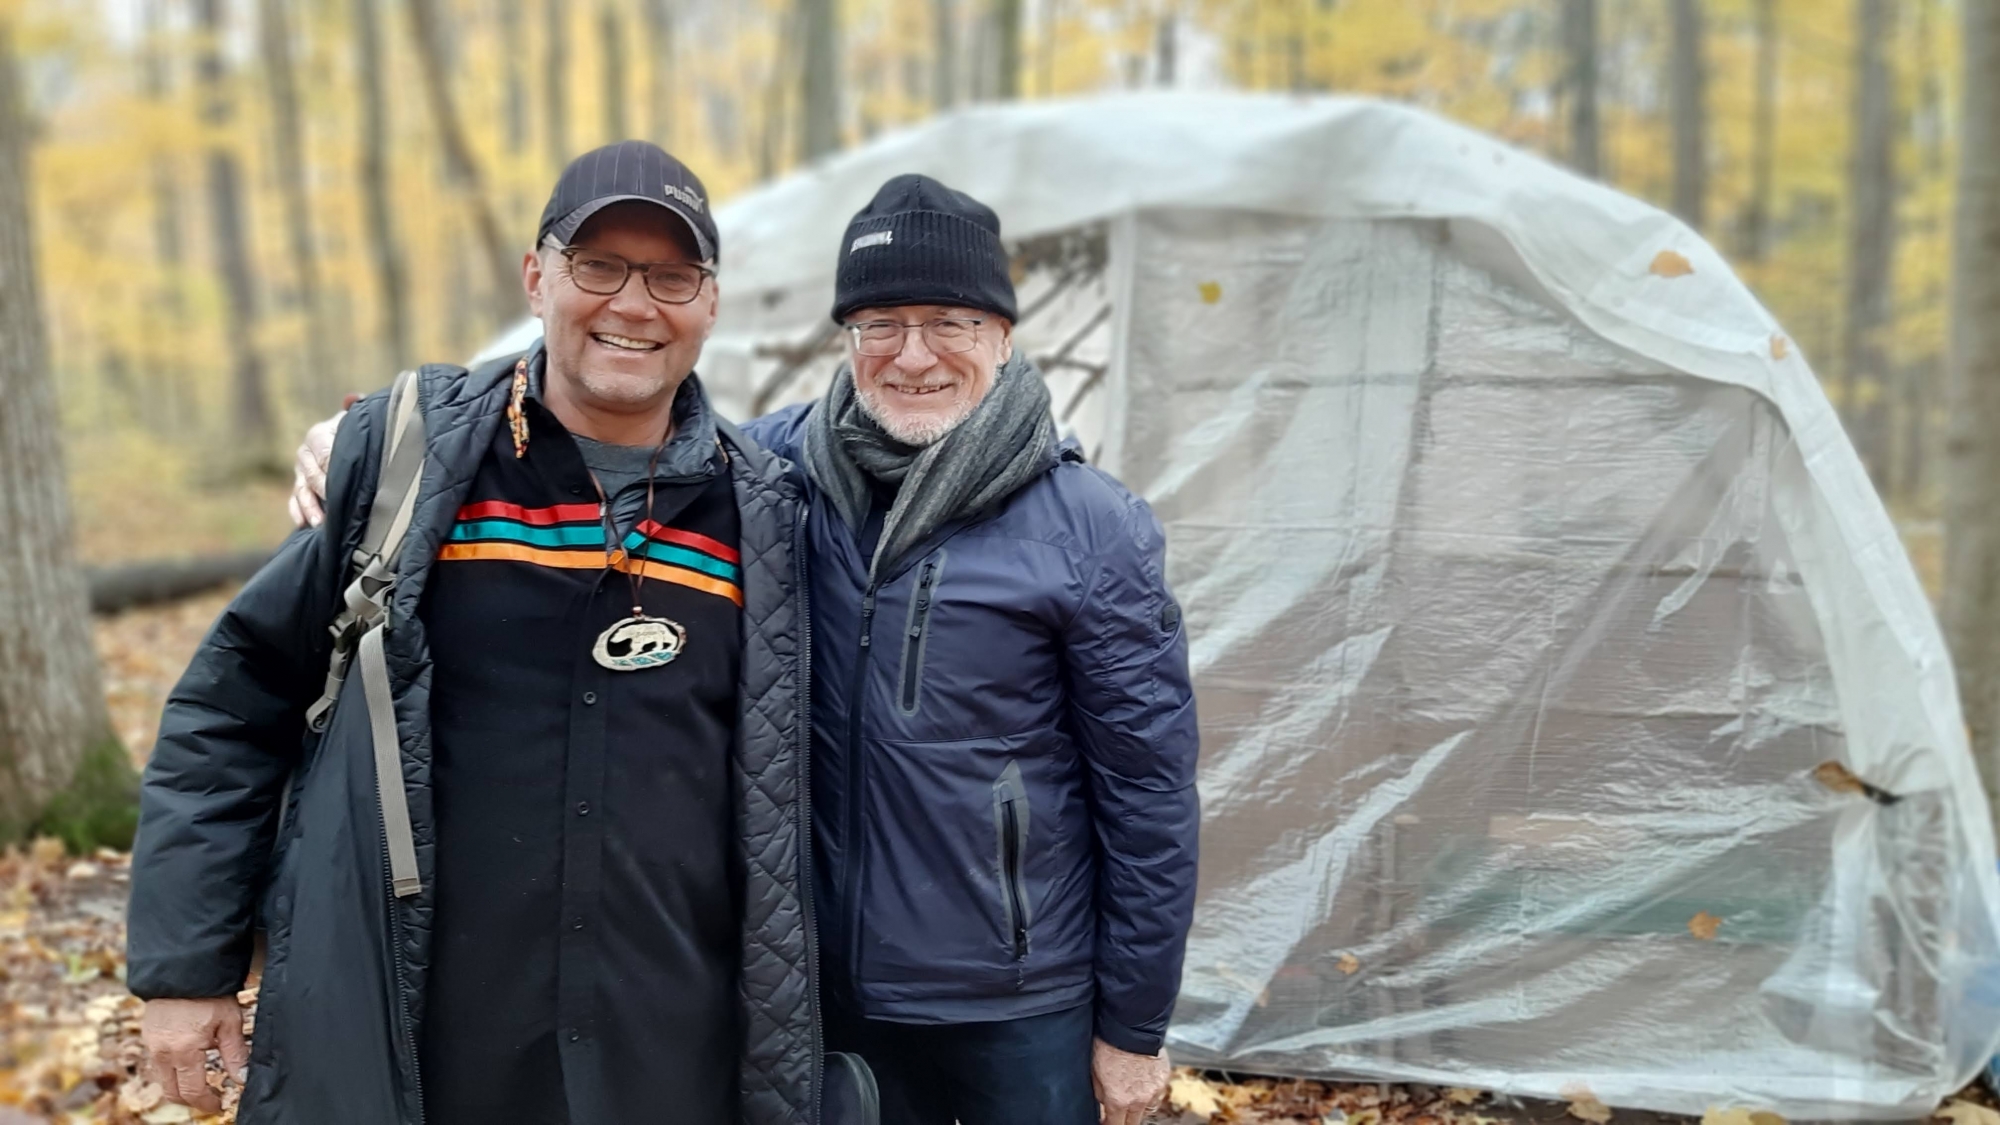 Crow Shield Lodge founder Clarence Cachagee, left, with guest speaker Bob Nally, a Canadian who immigrated from Ireland 50 years ago. The lodge is a place where Indigenous and non-Indigenous people can learn what it means to be Indigenous, said Cachagee.